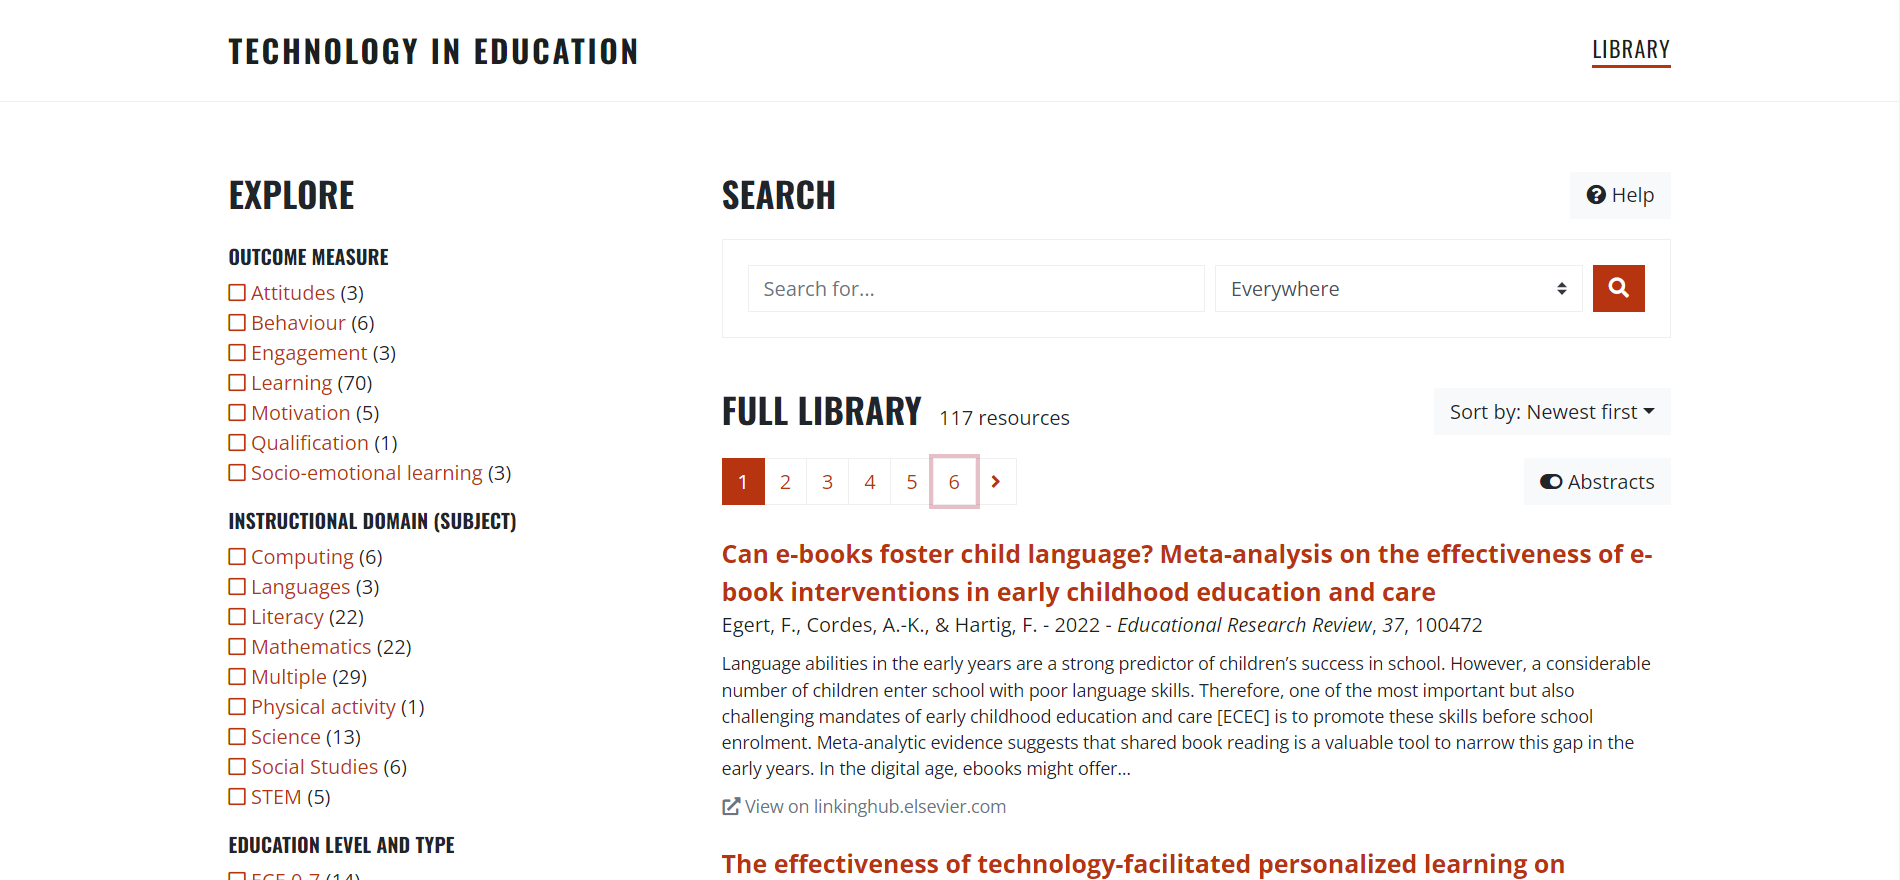 Technology in Education library